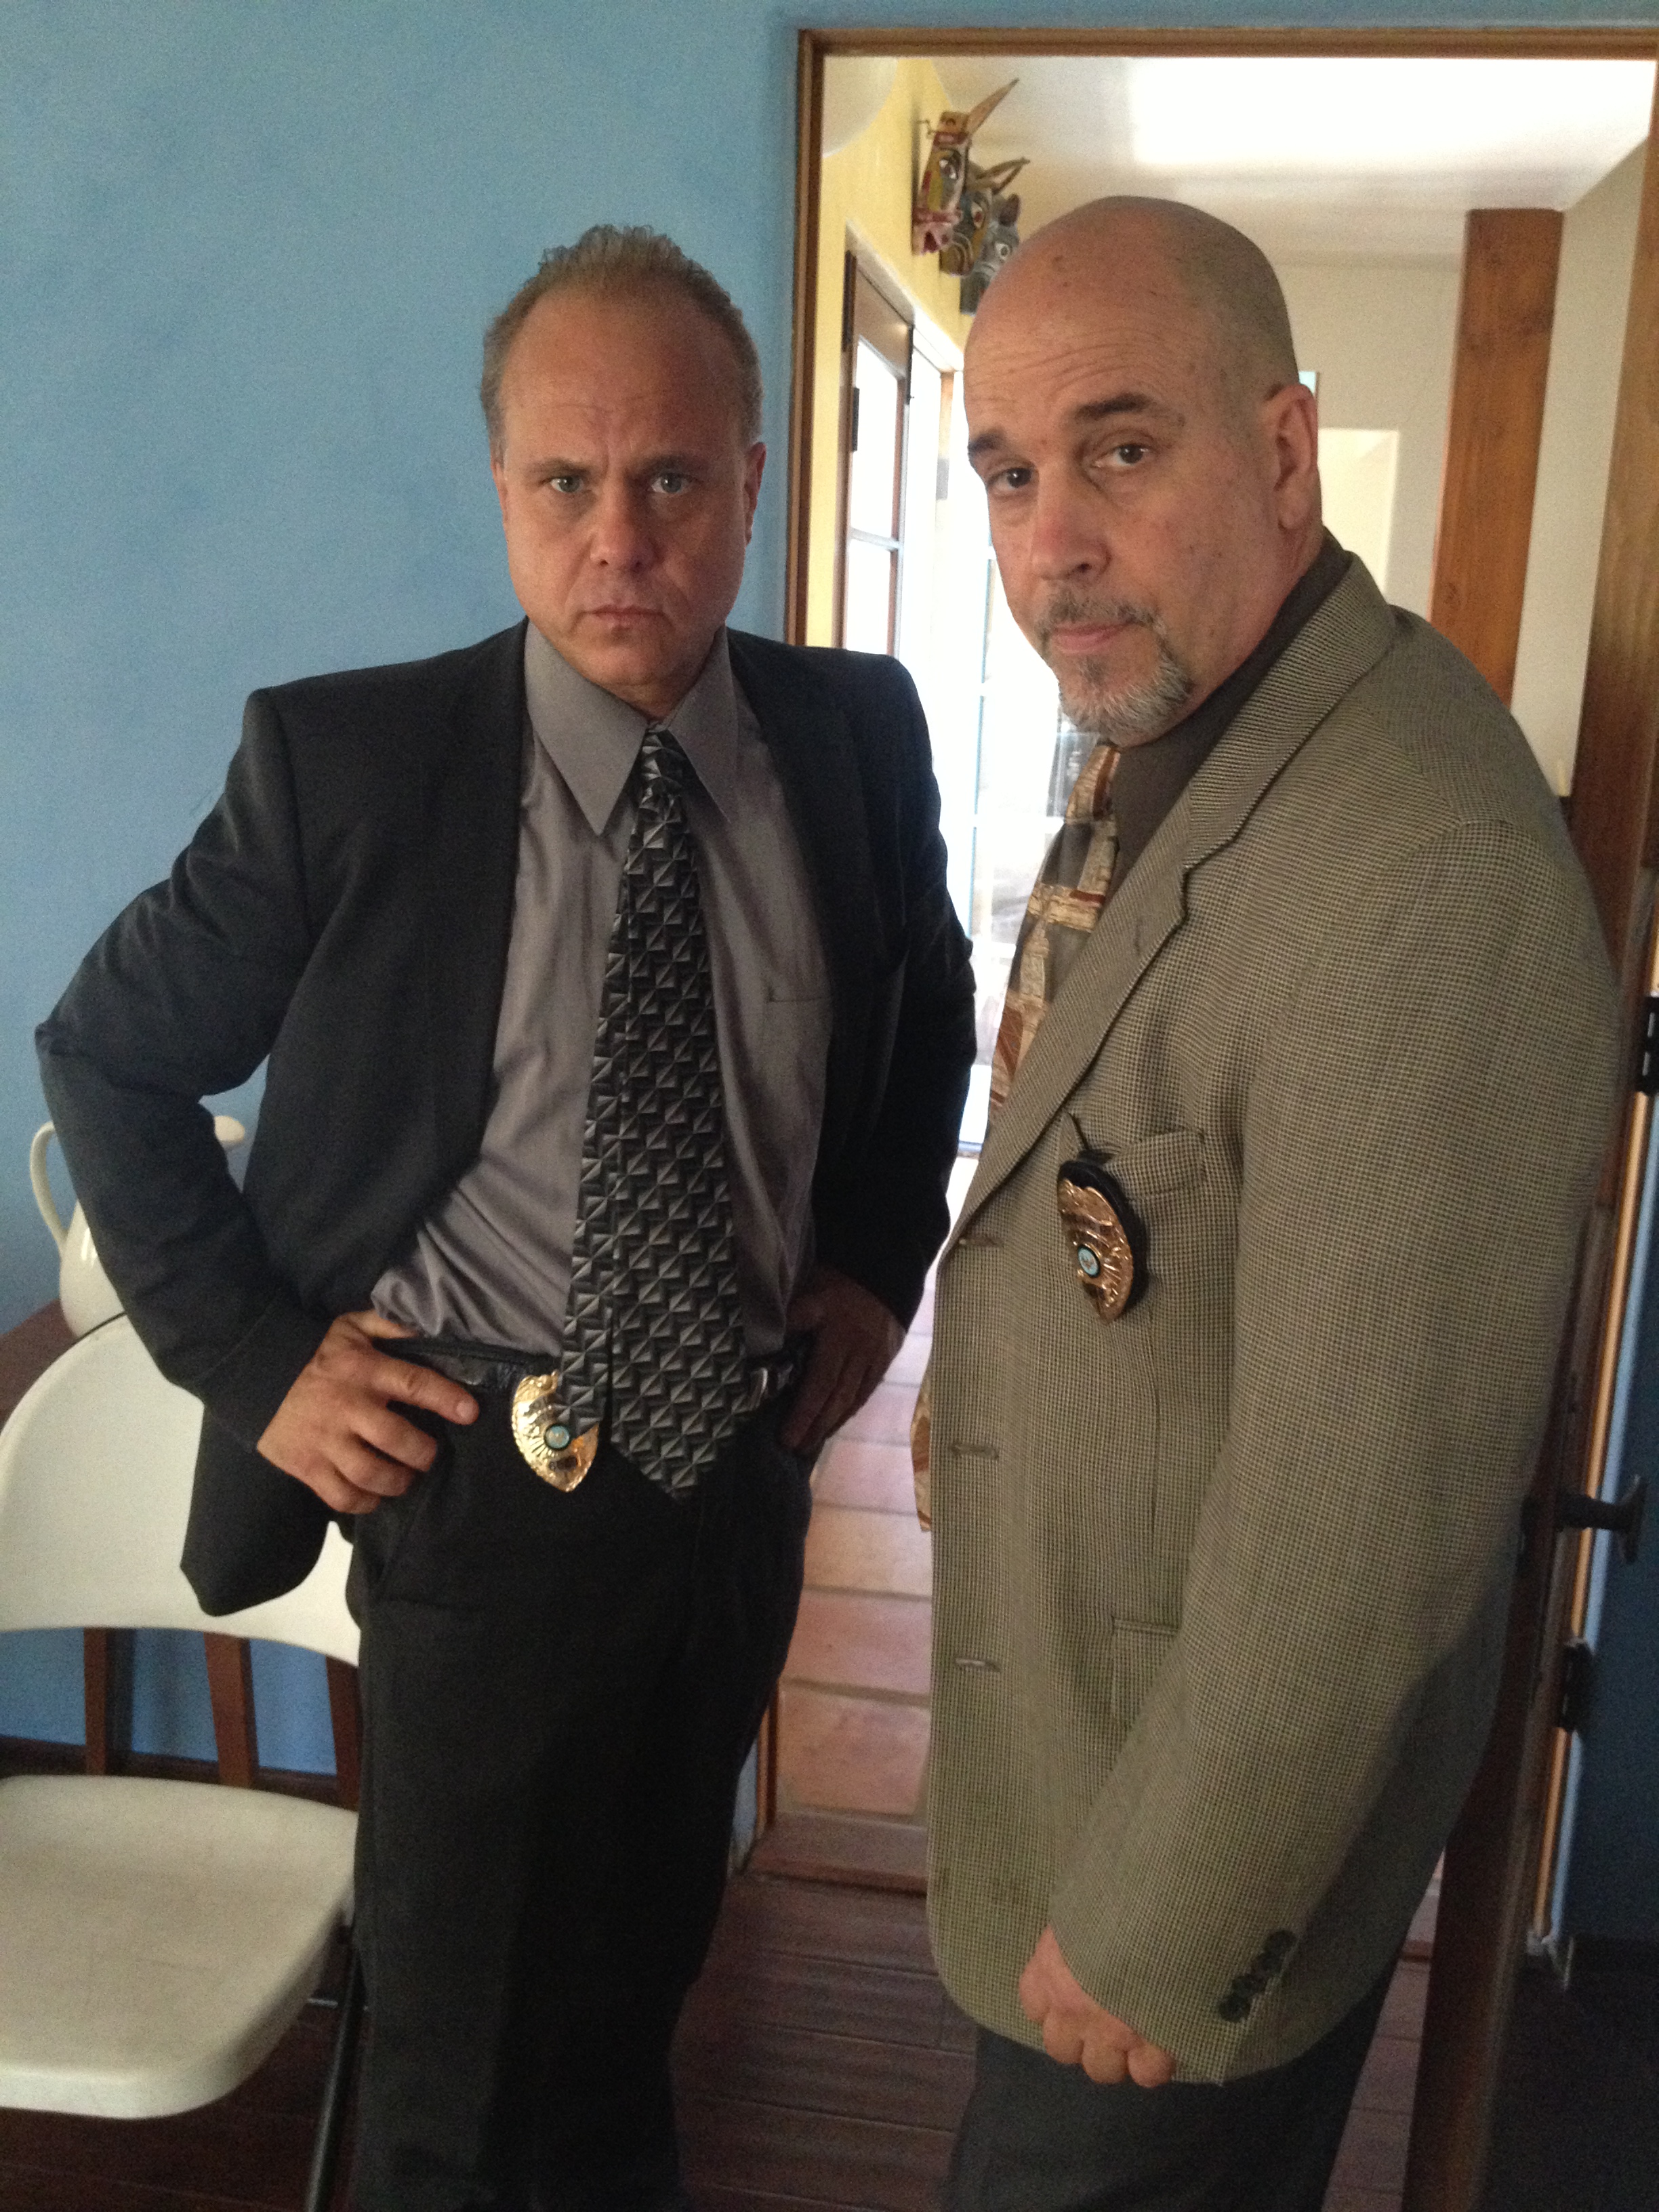 Dennis W. Hall & Robert Dominick Jones as Detectives on the Independent Discovery Network.